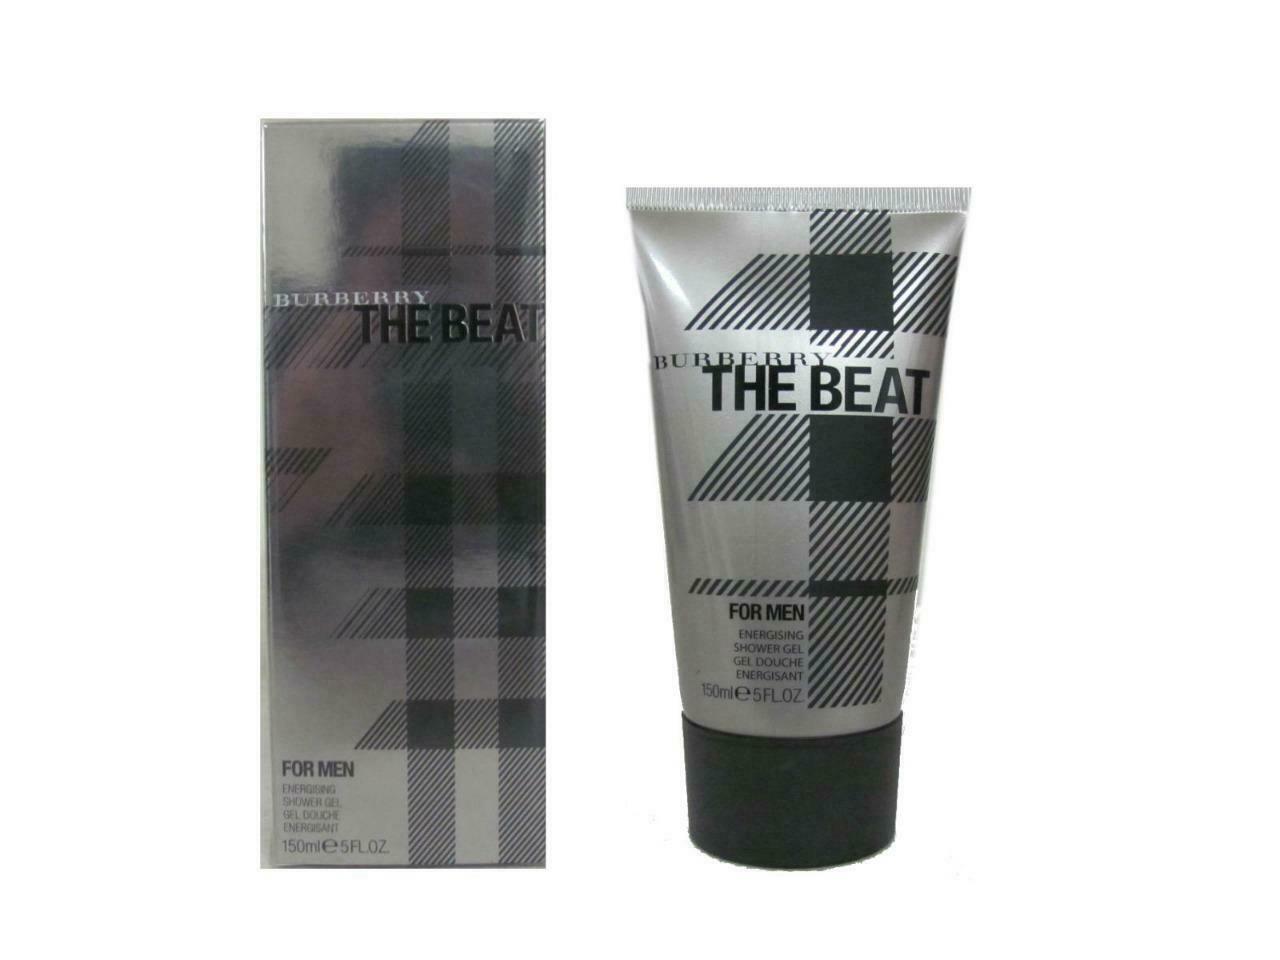 Burberry The Beat 5.0 oz Shower Gel for Men by Burberry - $22.95